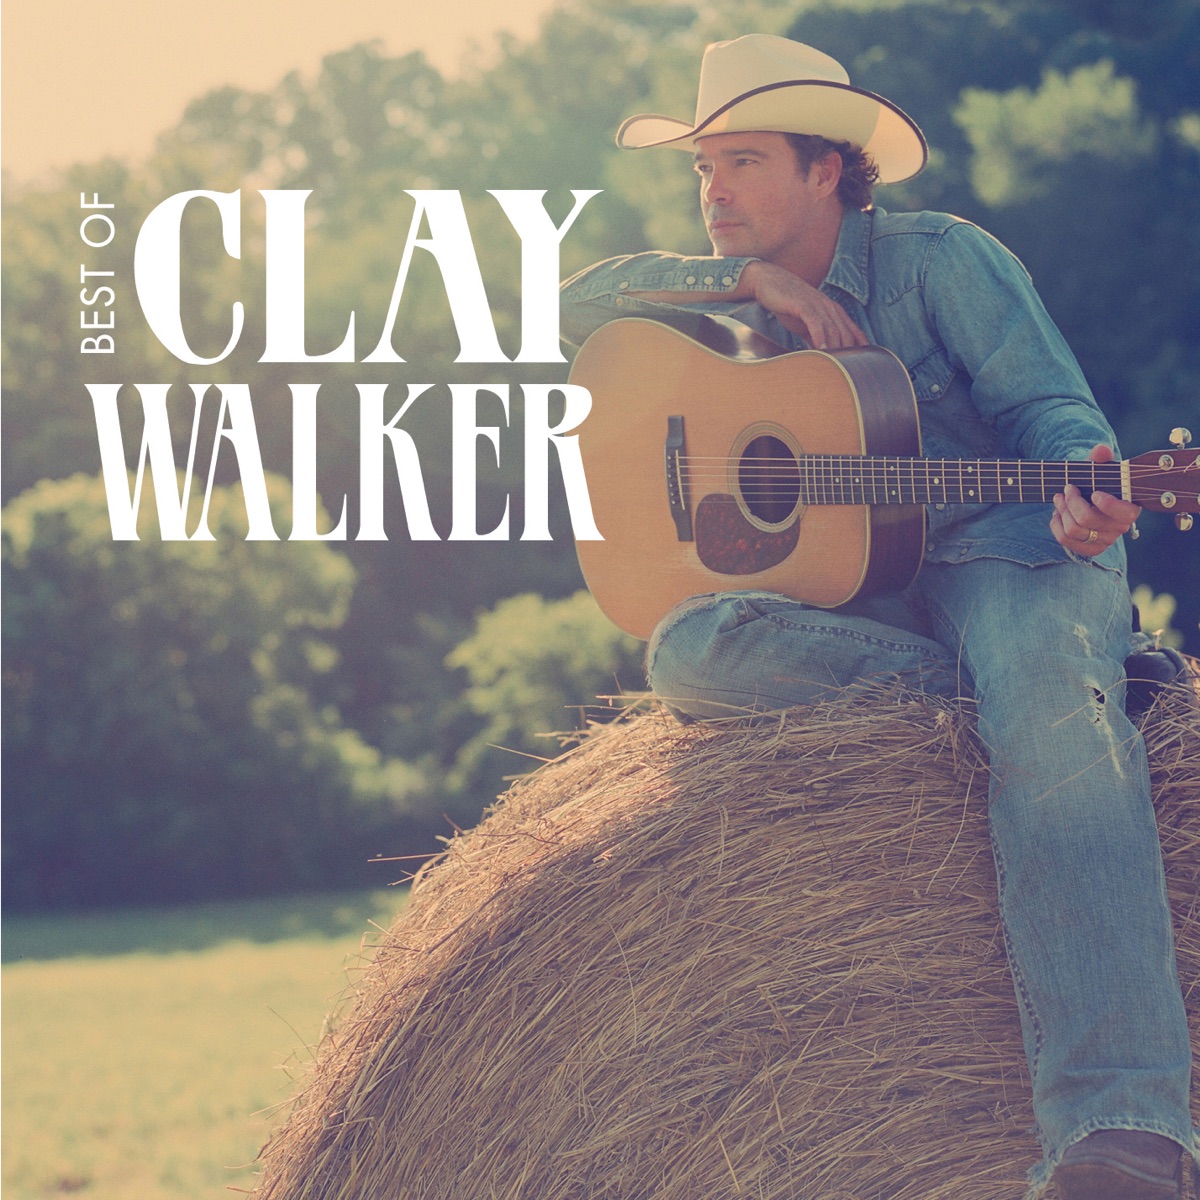 Live, Laugh, Love by Clay Walker on Apple Music